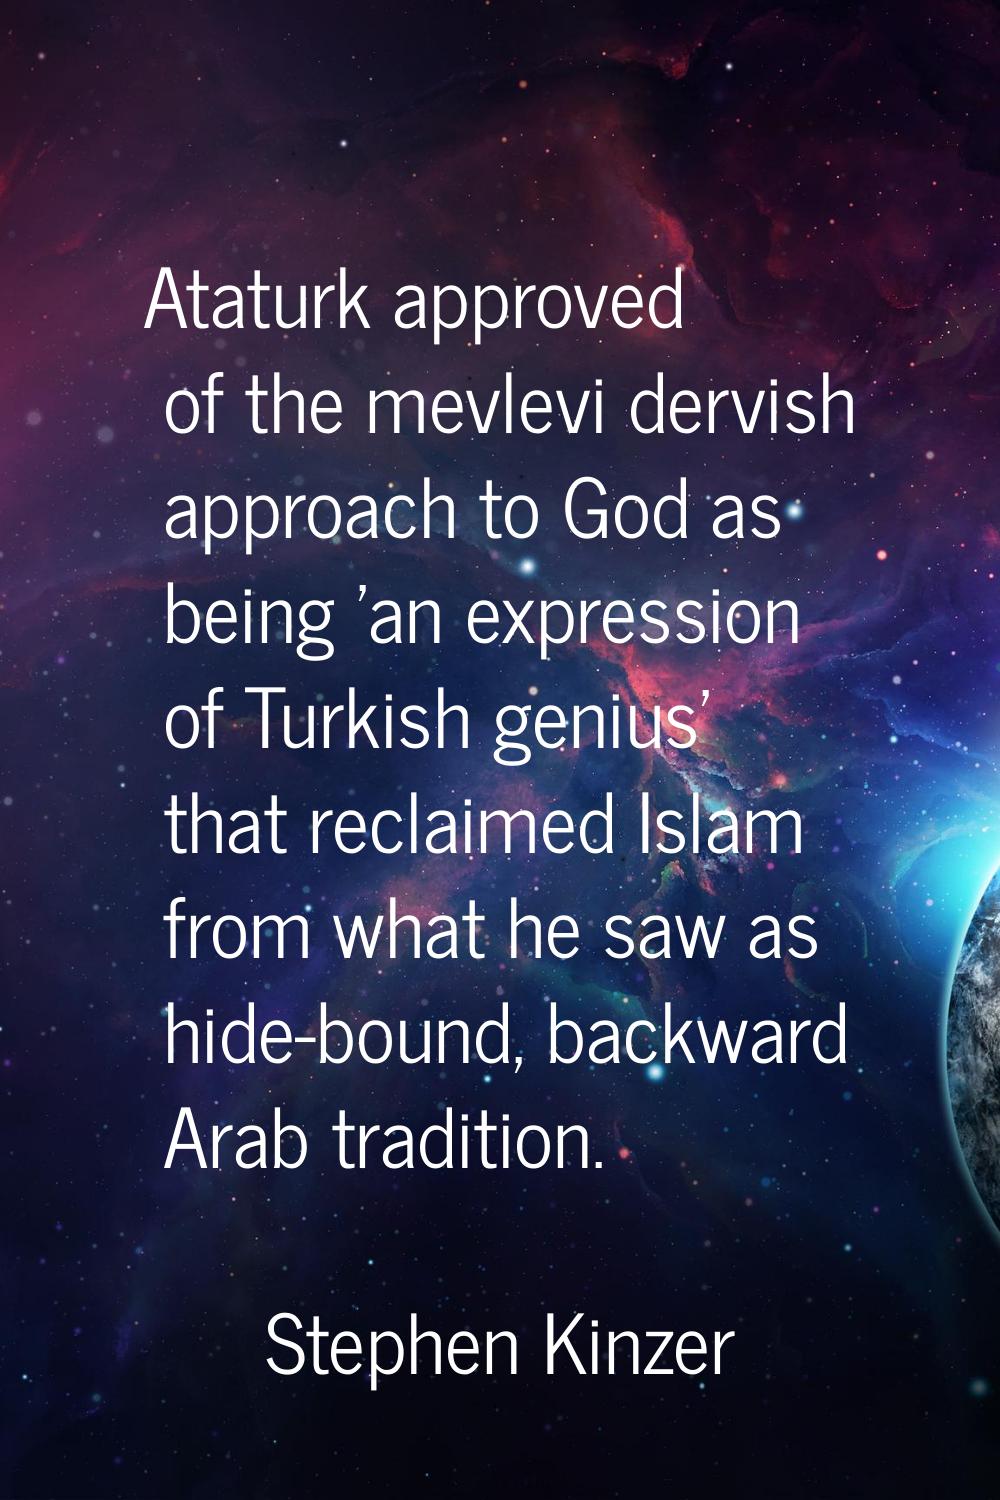 Ataturk approved of the mevlevi dervish approach to God as being 'an expression of Turkish genius' 